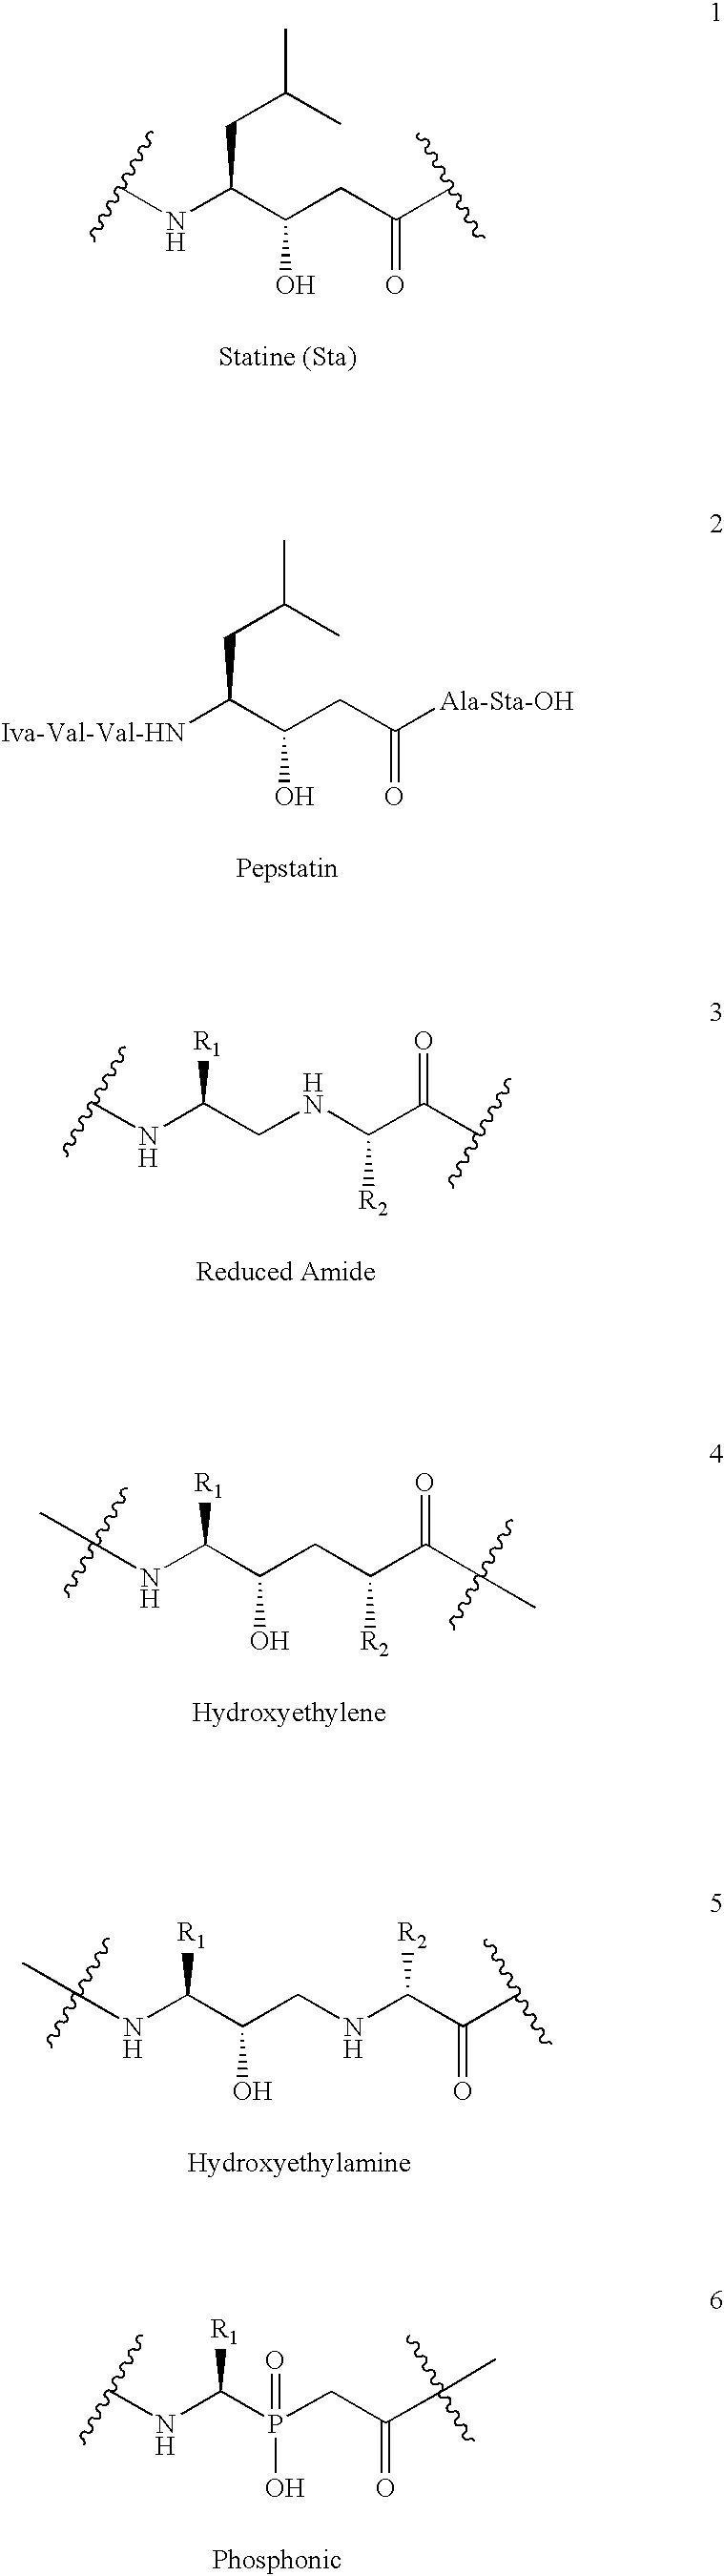 Method to design therapeutically important compounds